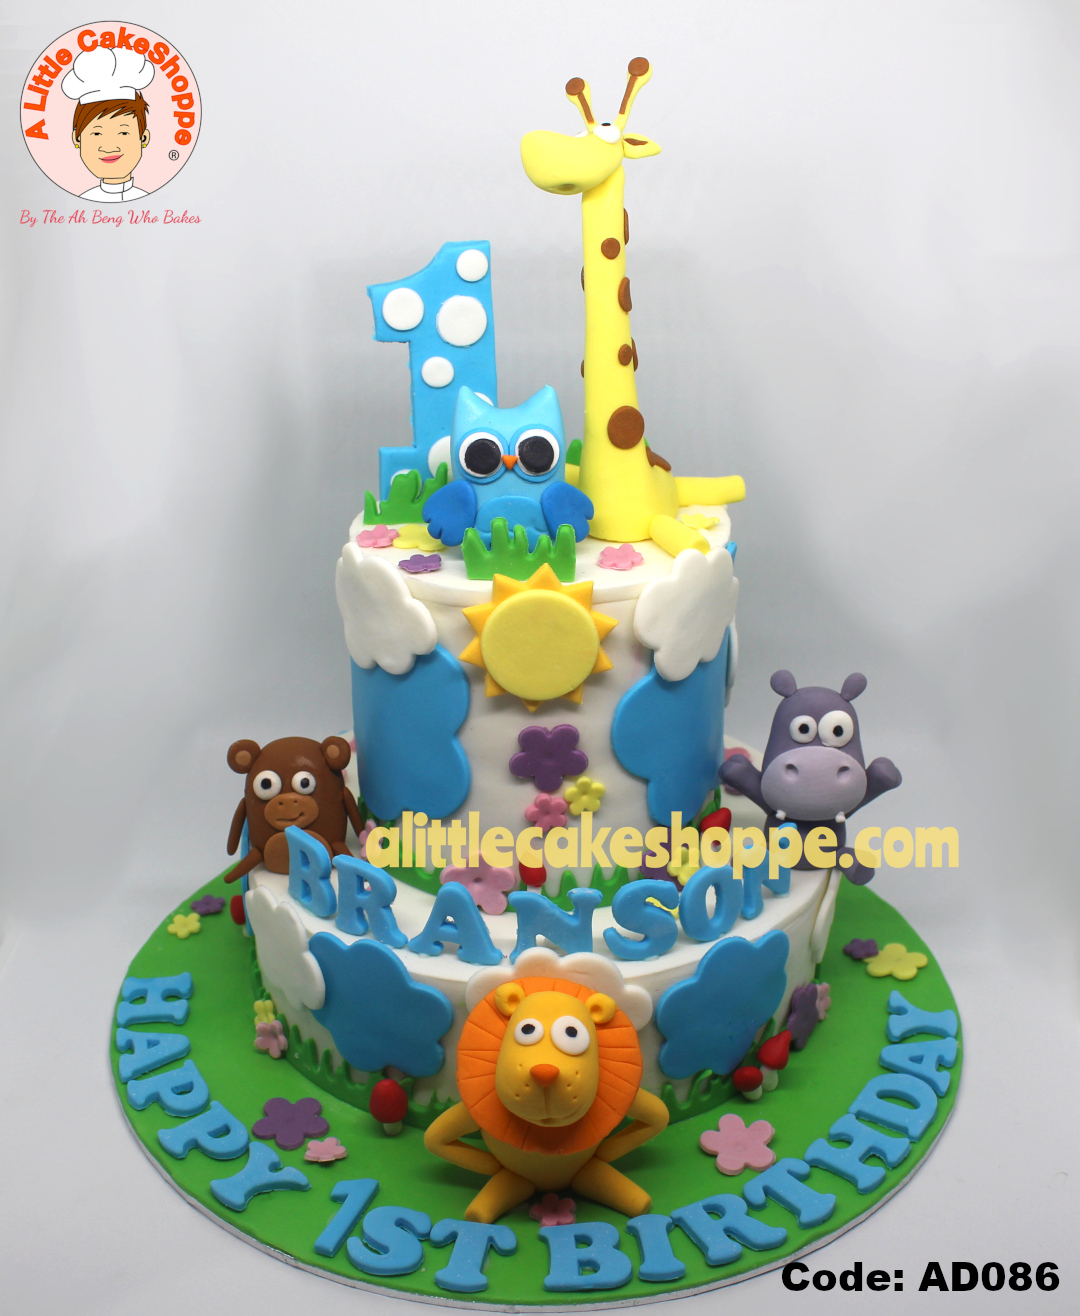 Best Cake Shop Singapore Delivery Best Customised Cake Shop Singapore customise cake custom cake 2D 3D birthday cake cupcakes desserts wedding corporate events anniversary 1st birthday 21st birthday fondant fresh cream buttercream cakes alittlecakeshoppe a little cake shoppe compliments review singapore bakers SG cake shop cakeshop ah beng who bakes sgbakes novelty cakes sgcakes licensed sfa nea cake delivery celebration cakes kids birthday cake surprise cake adult children animal safari